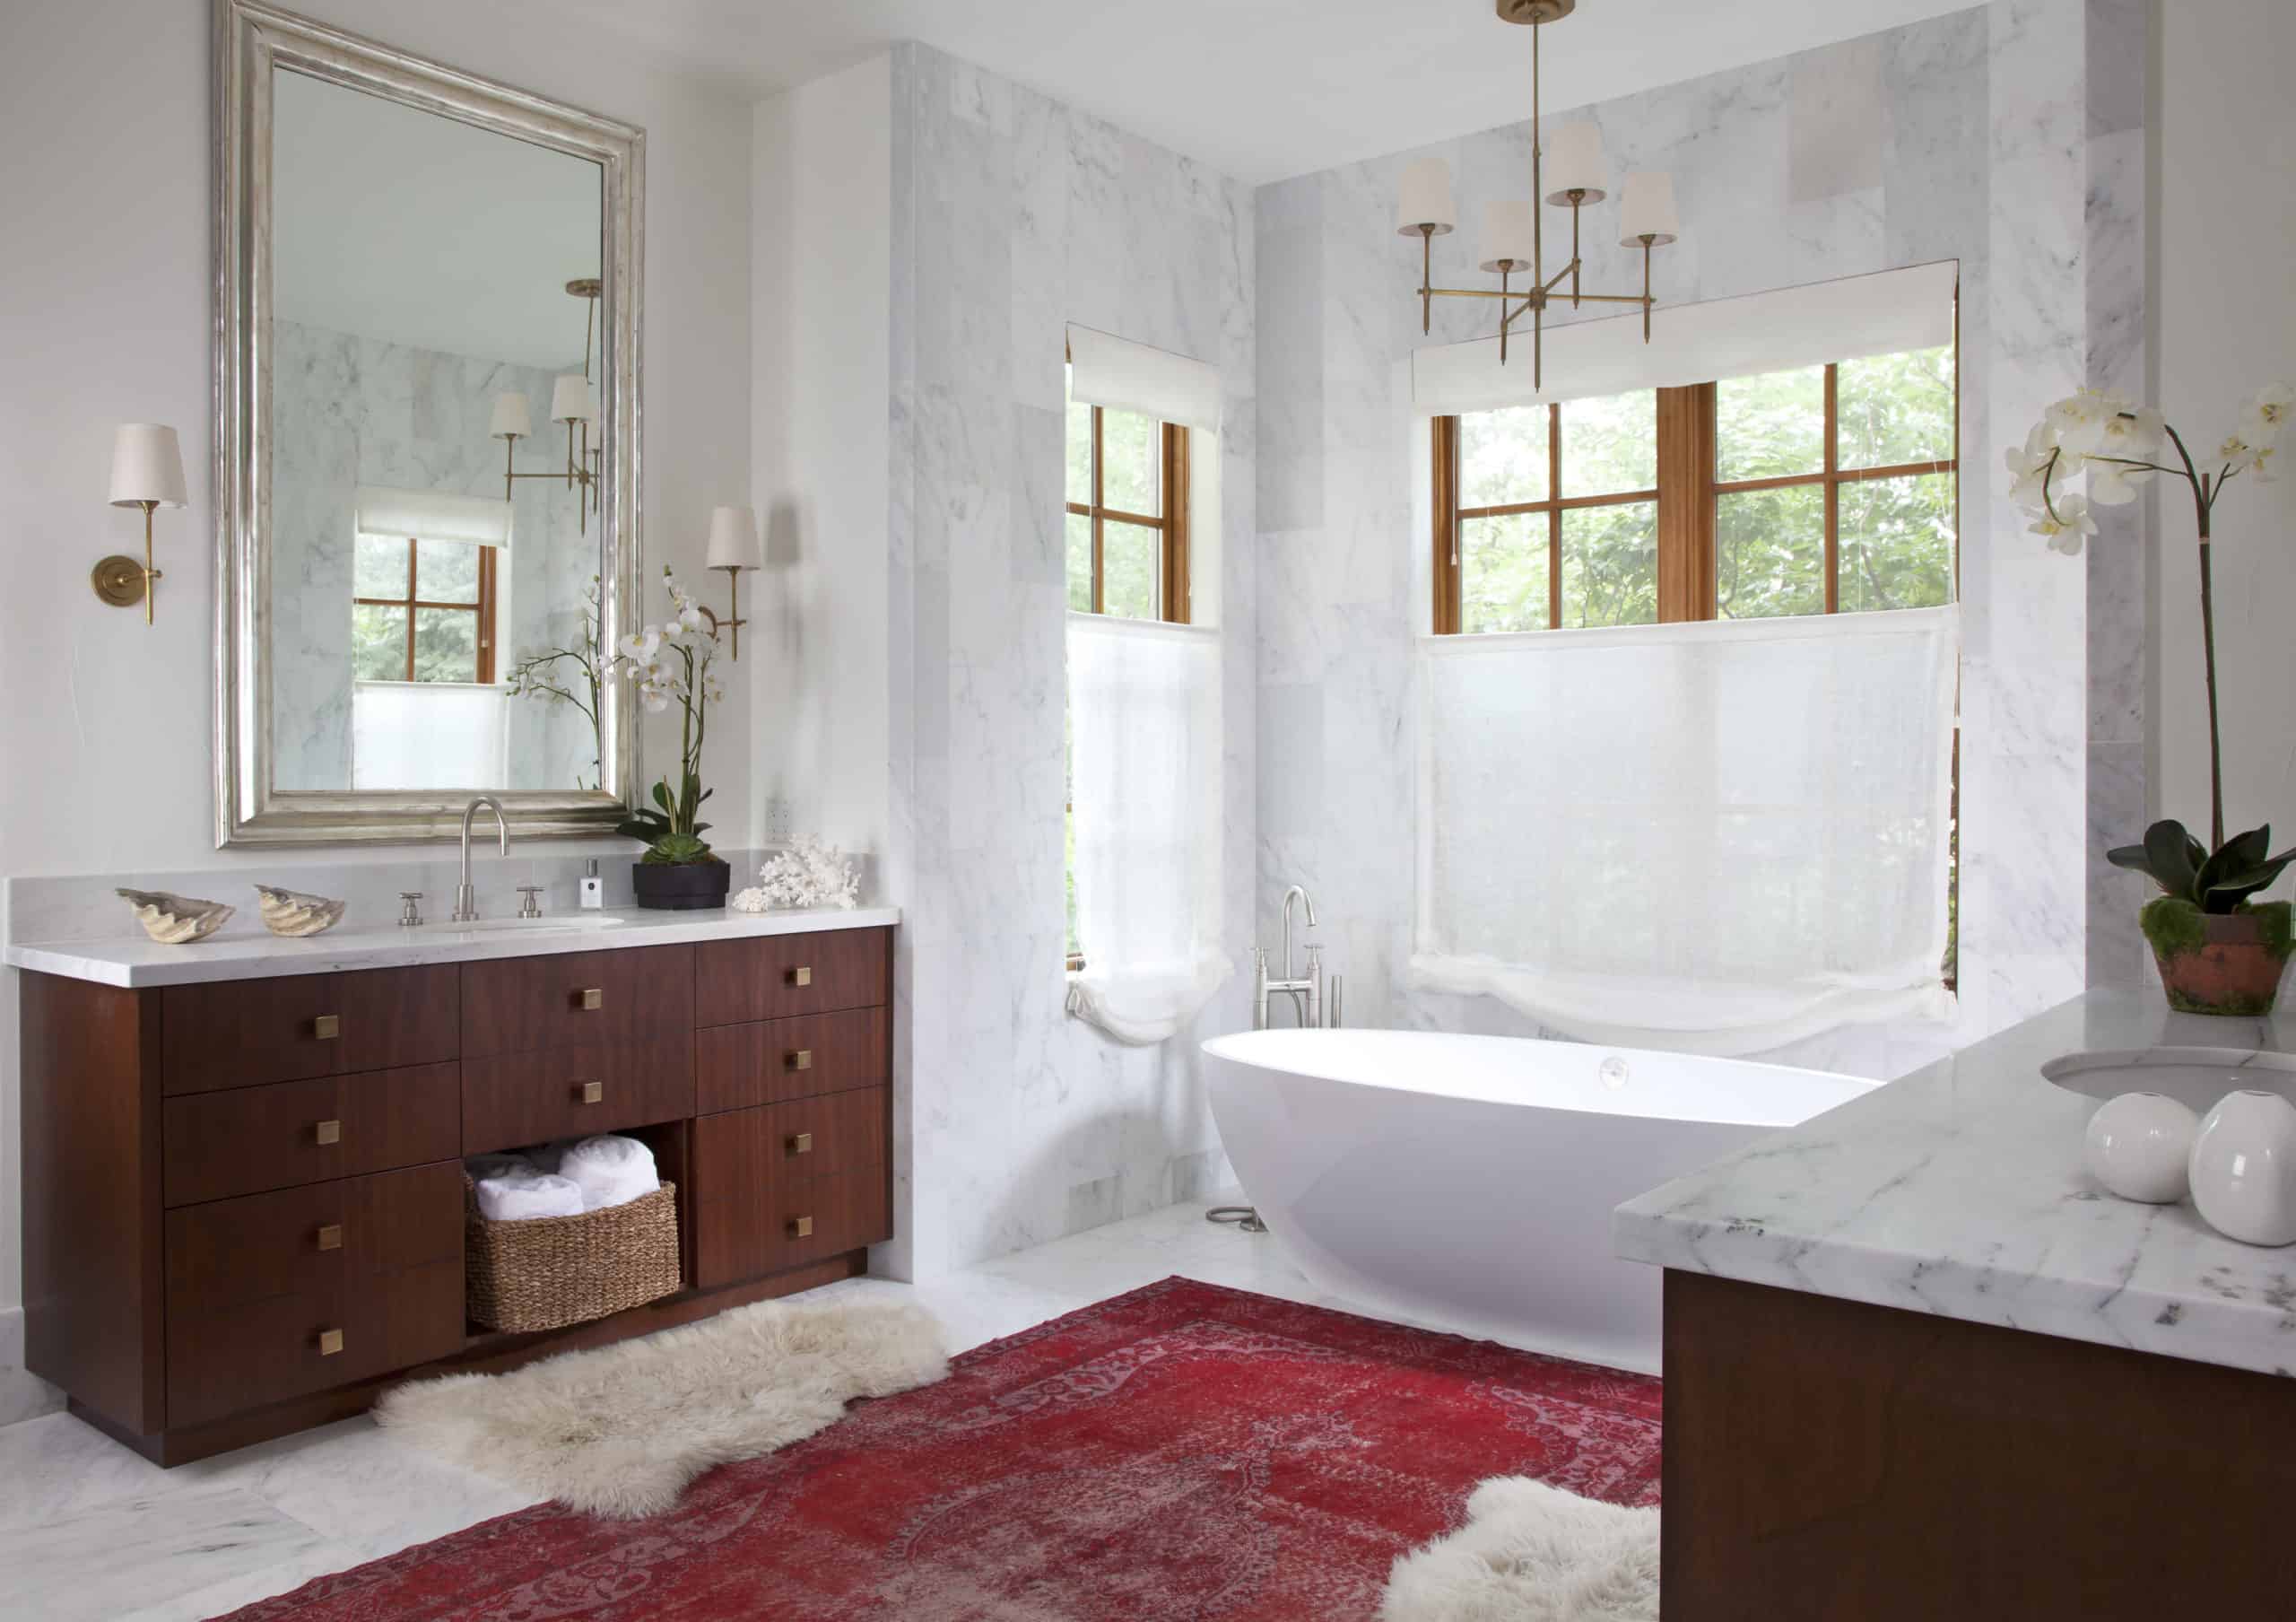 Serene Boldness in Luxury Bathroom Renovation with Two Vanities and Red Accent Rug